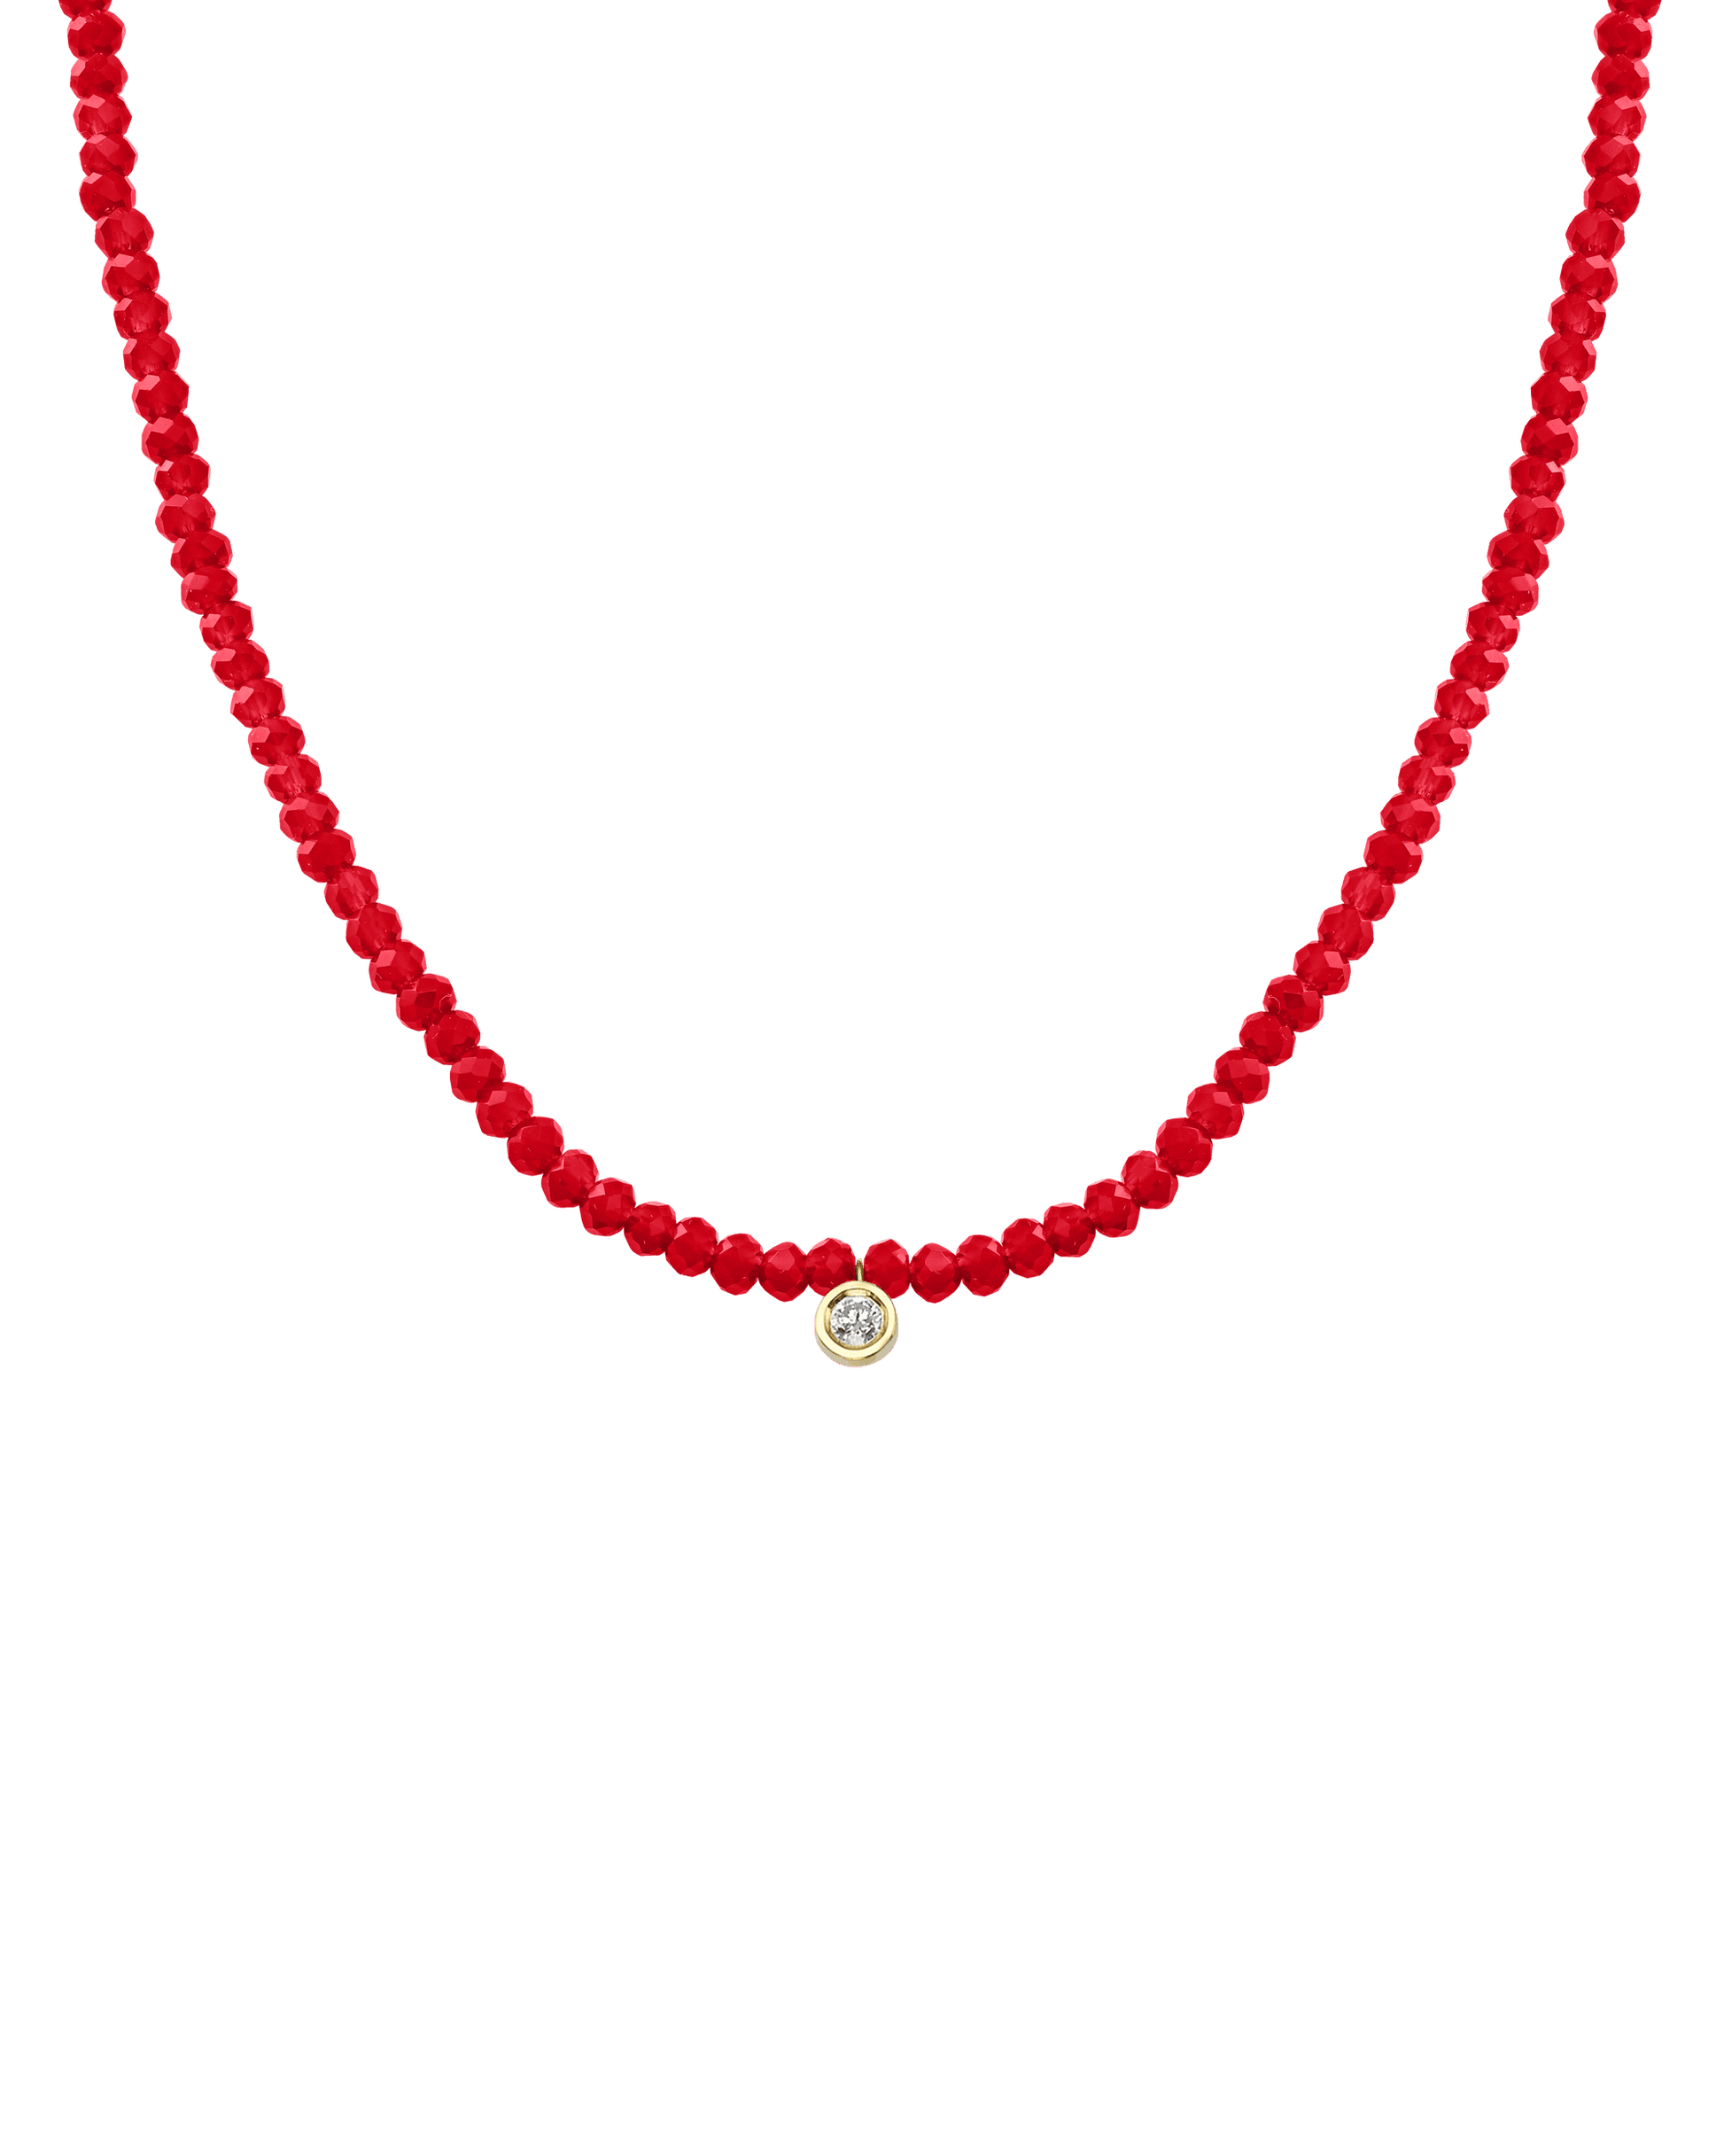 Apatite Gemstone & Diamond Necklace - 14K Yellow Gold Necklaces 14K Solid Gold Natural Red Jade Medium: 0.05ct 14"